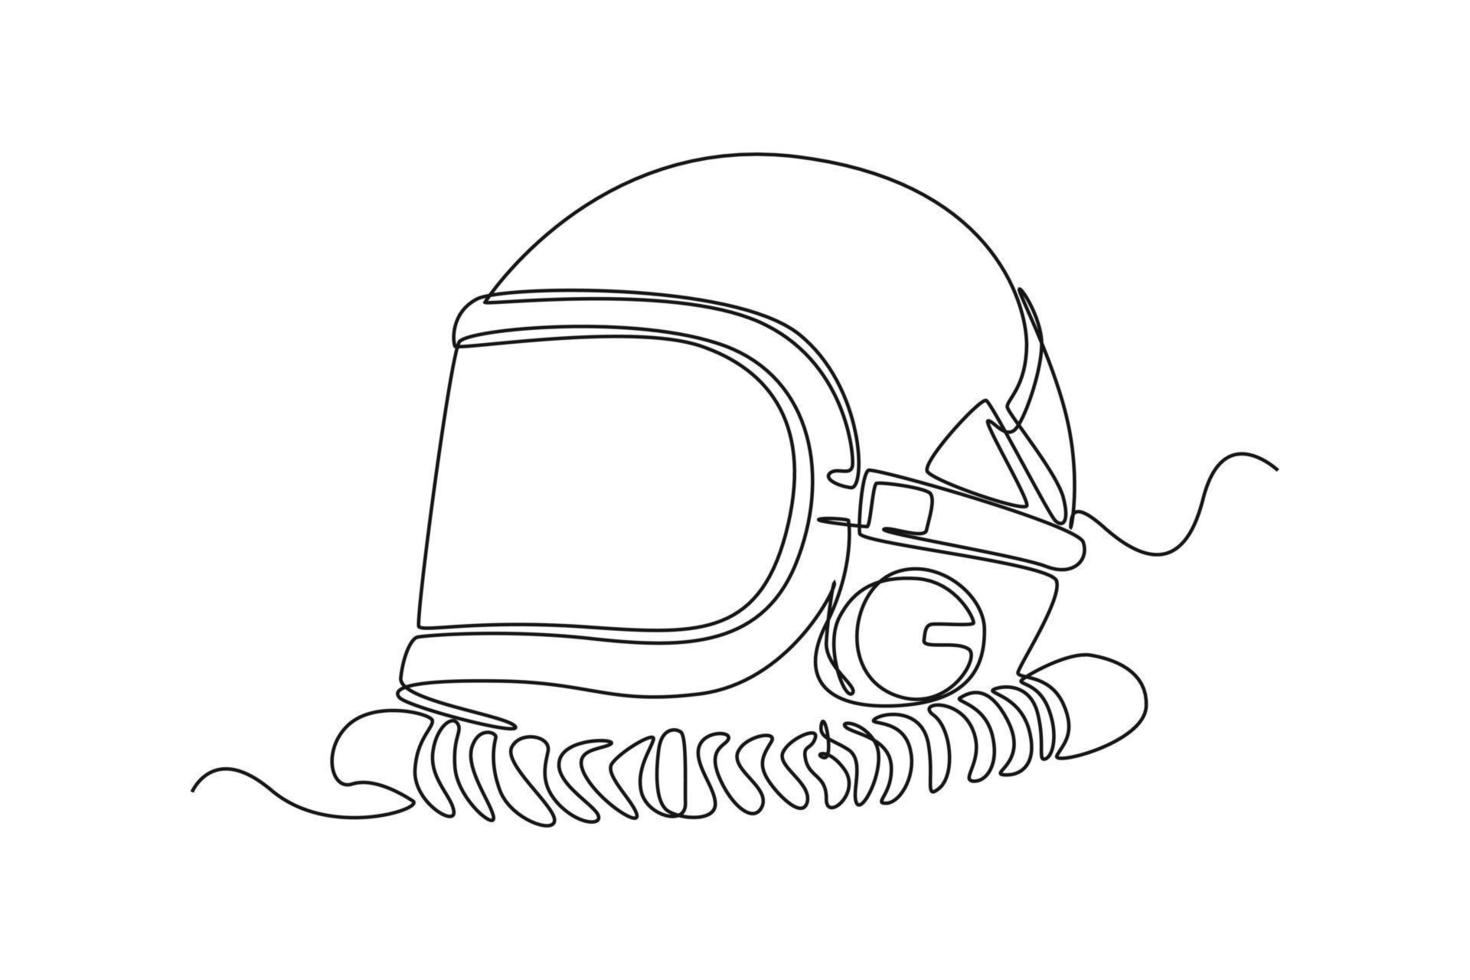 Continuous one line drawing Astronaut helmet. Outer space concept. Single line draw design vector graphic illustration.